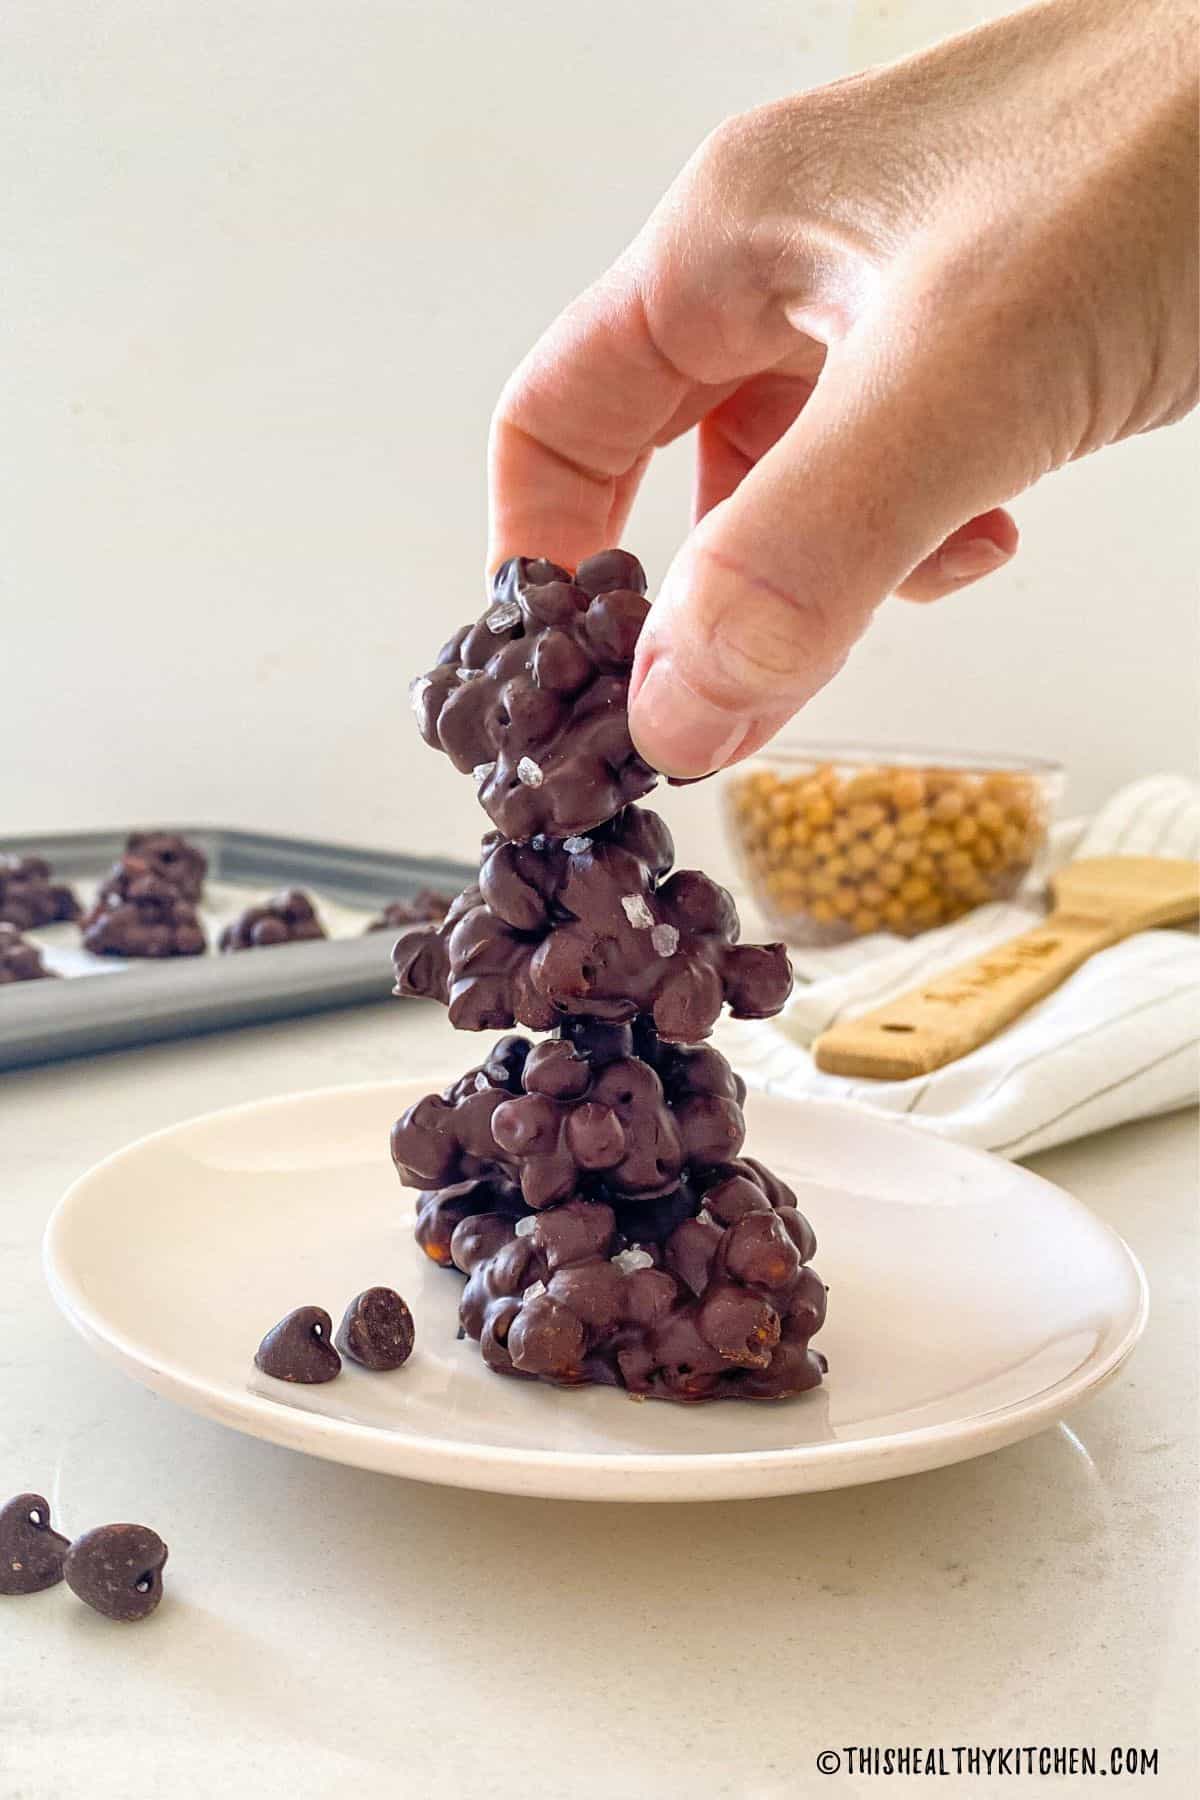 Stack of chocolate-covered chickpea clusters and hand grabbing top one.